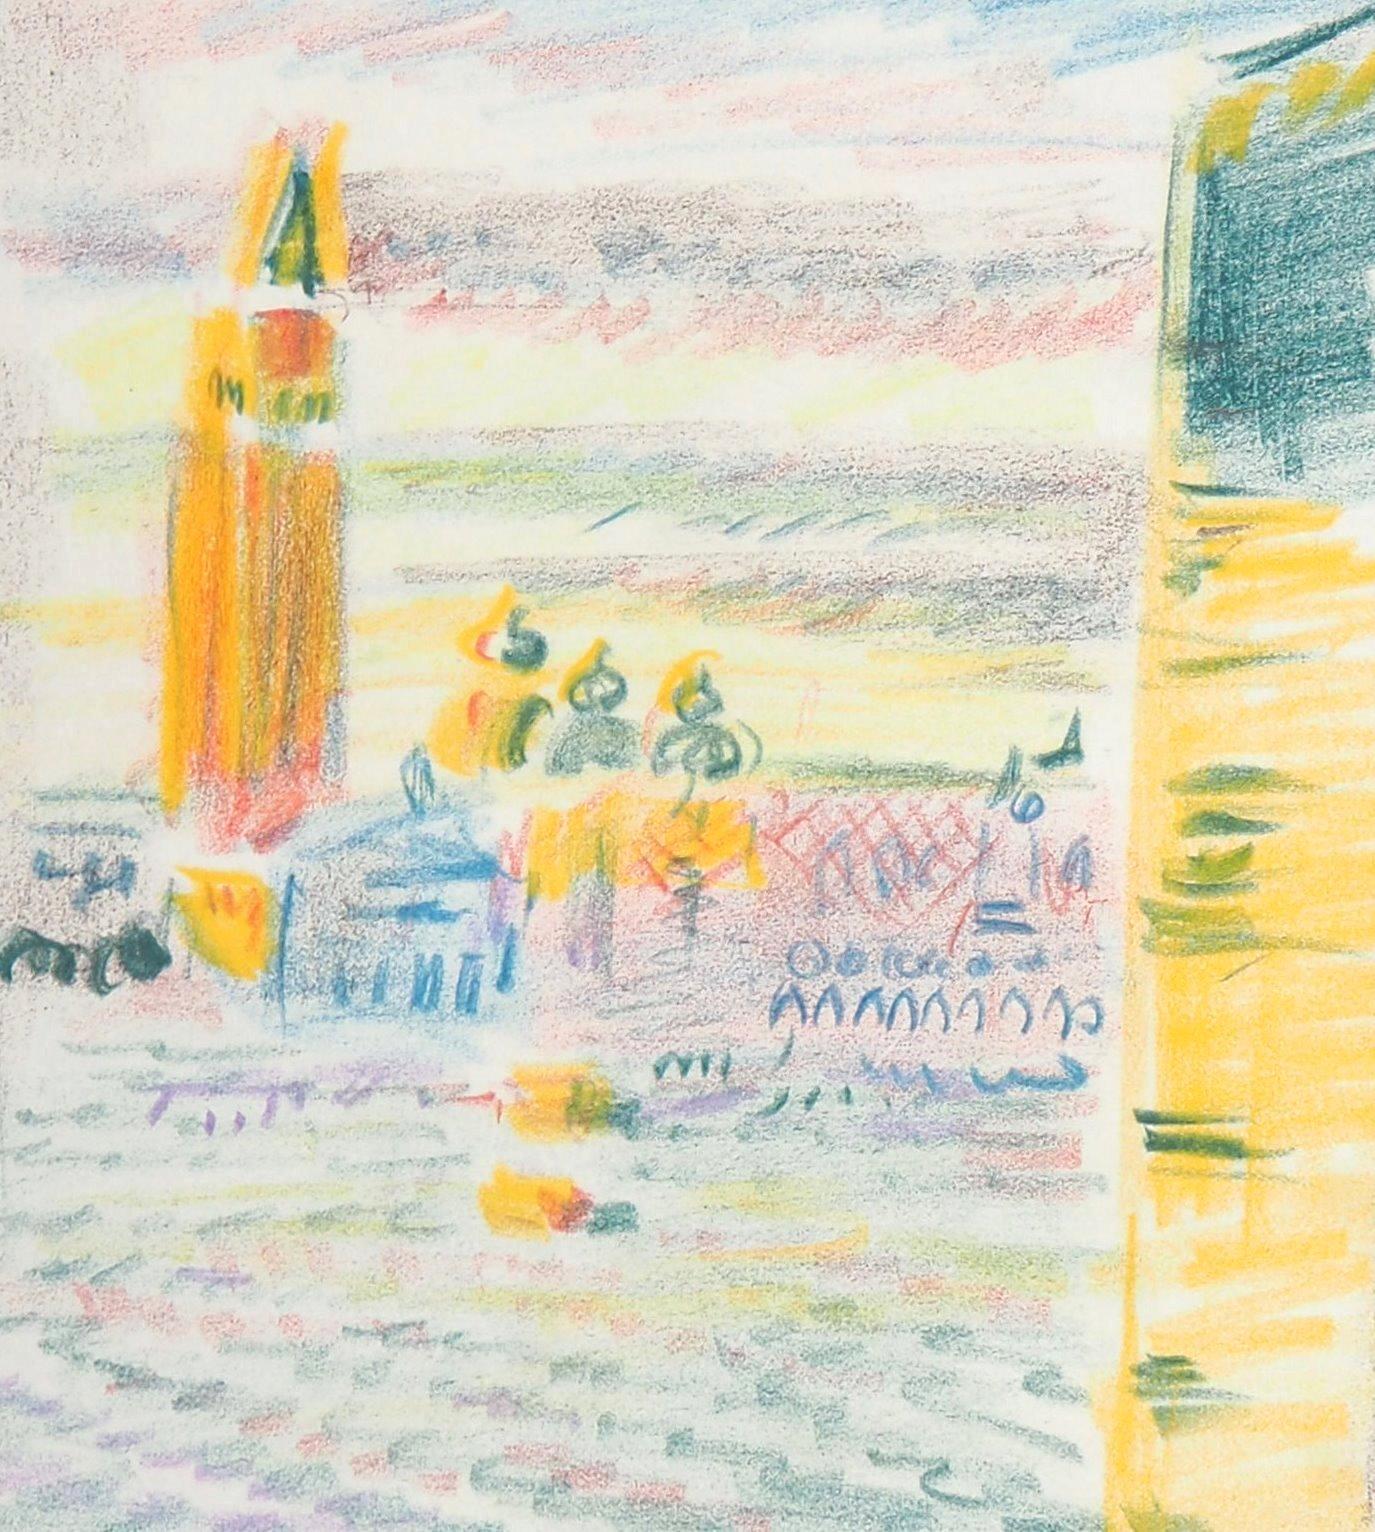 Venice in Sunset - Original Handsigned Pastel Drawing - Modern Art by André Masson